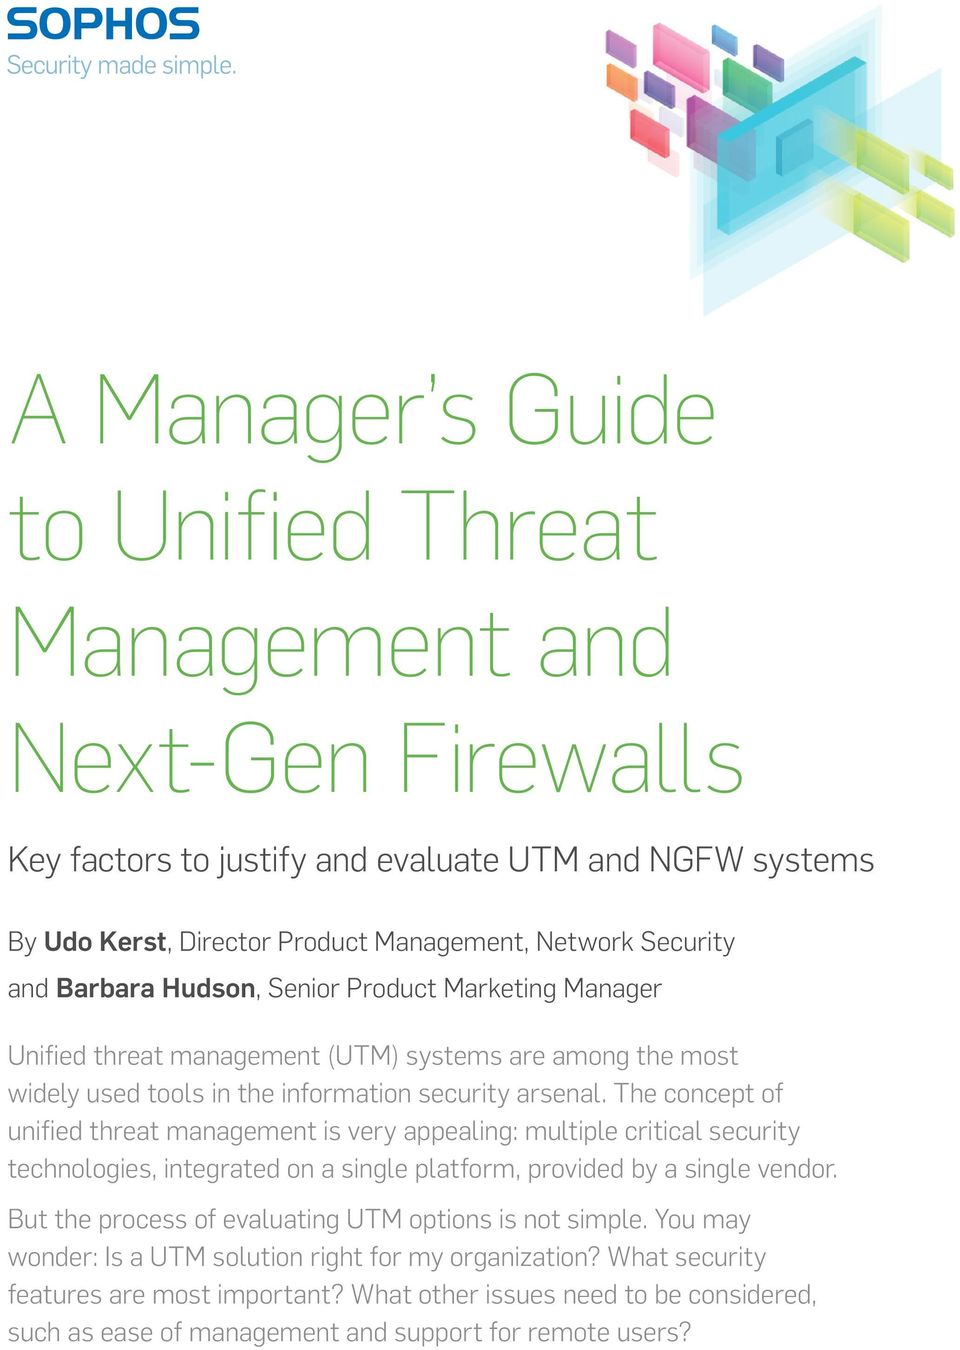 The concept of unified threat management is very appealing: multiple critical security technologies, integrated on a single platform, provided by a single vendor.